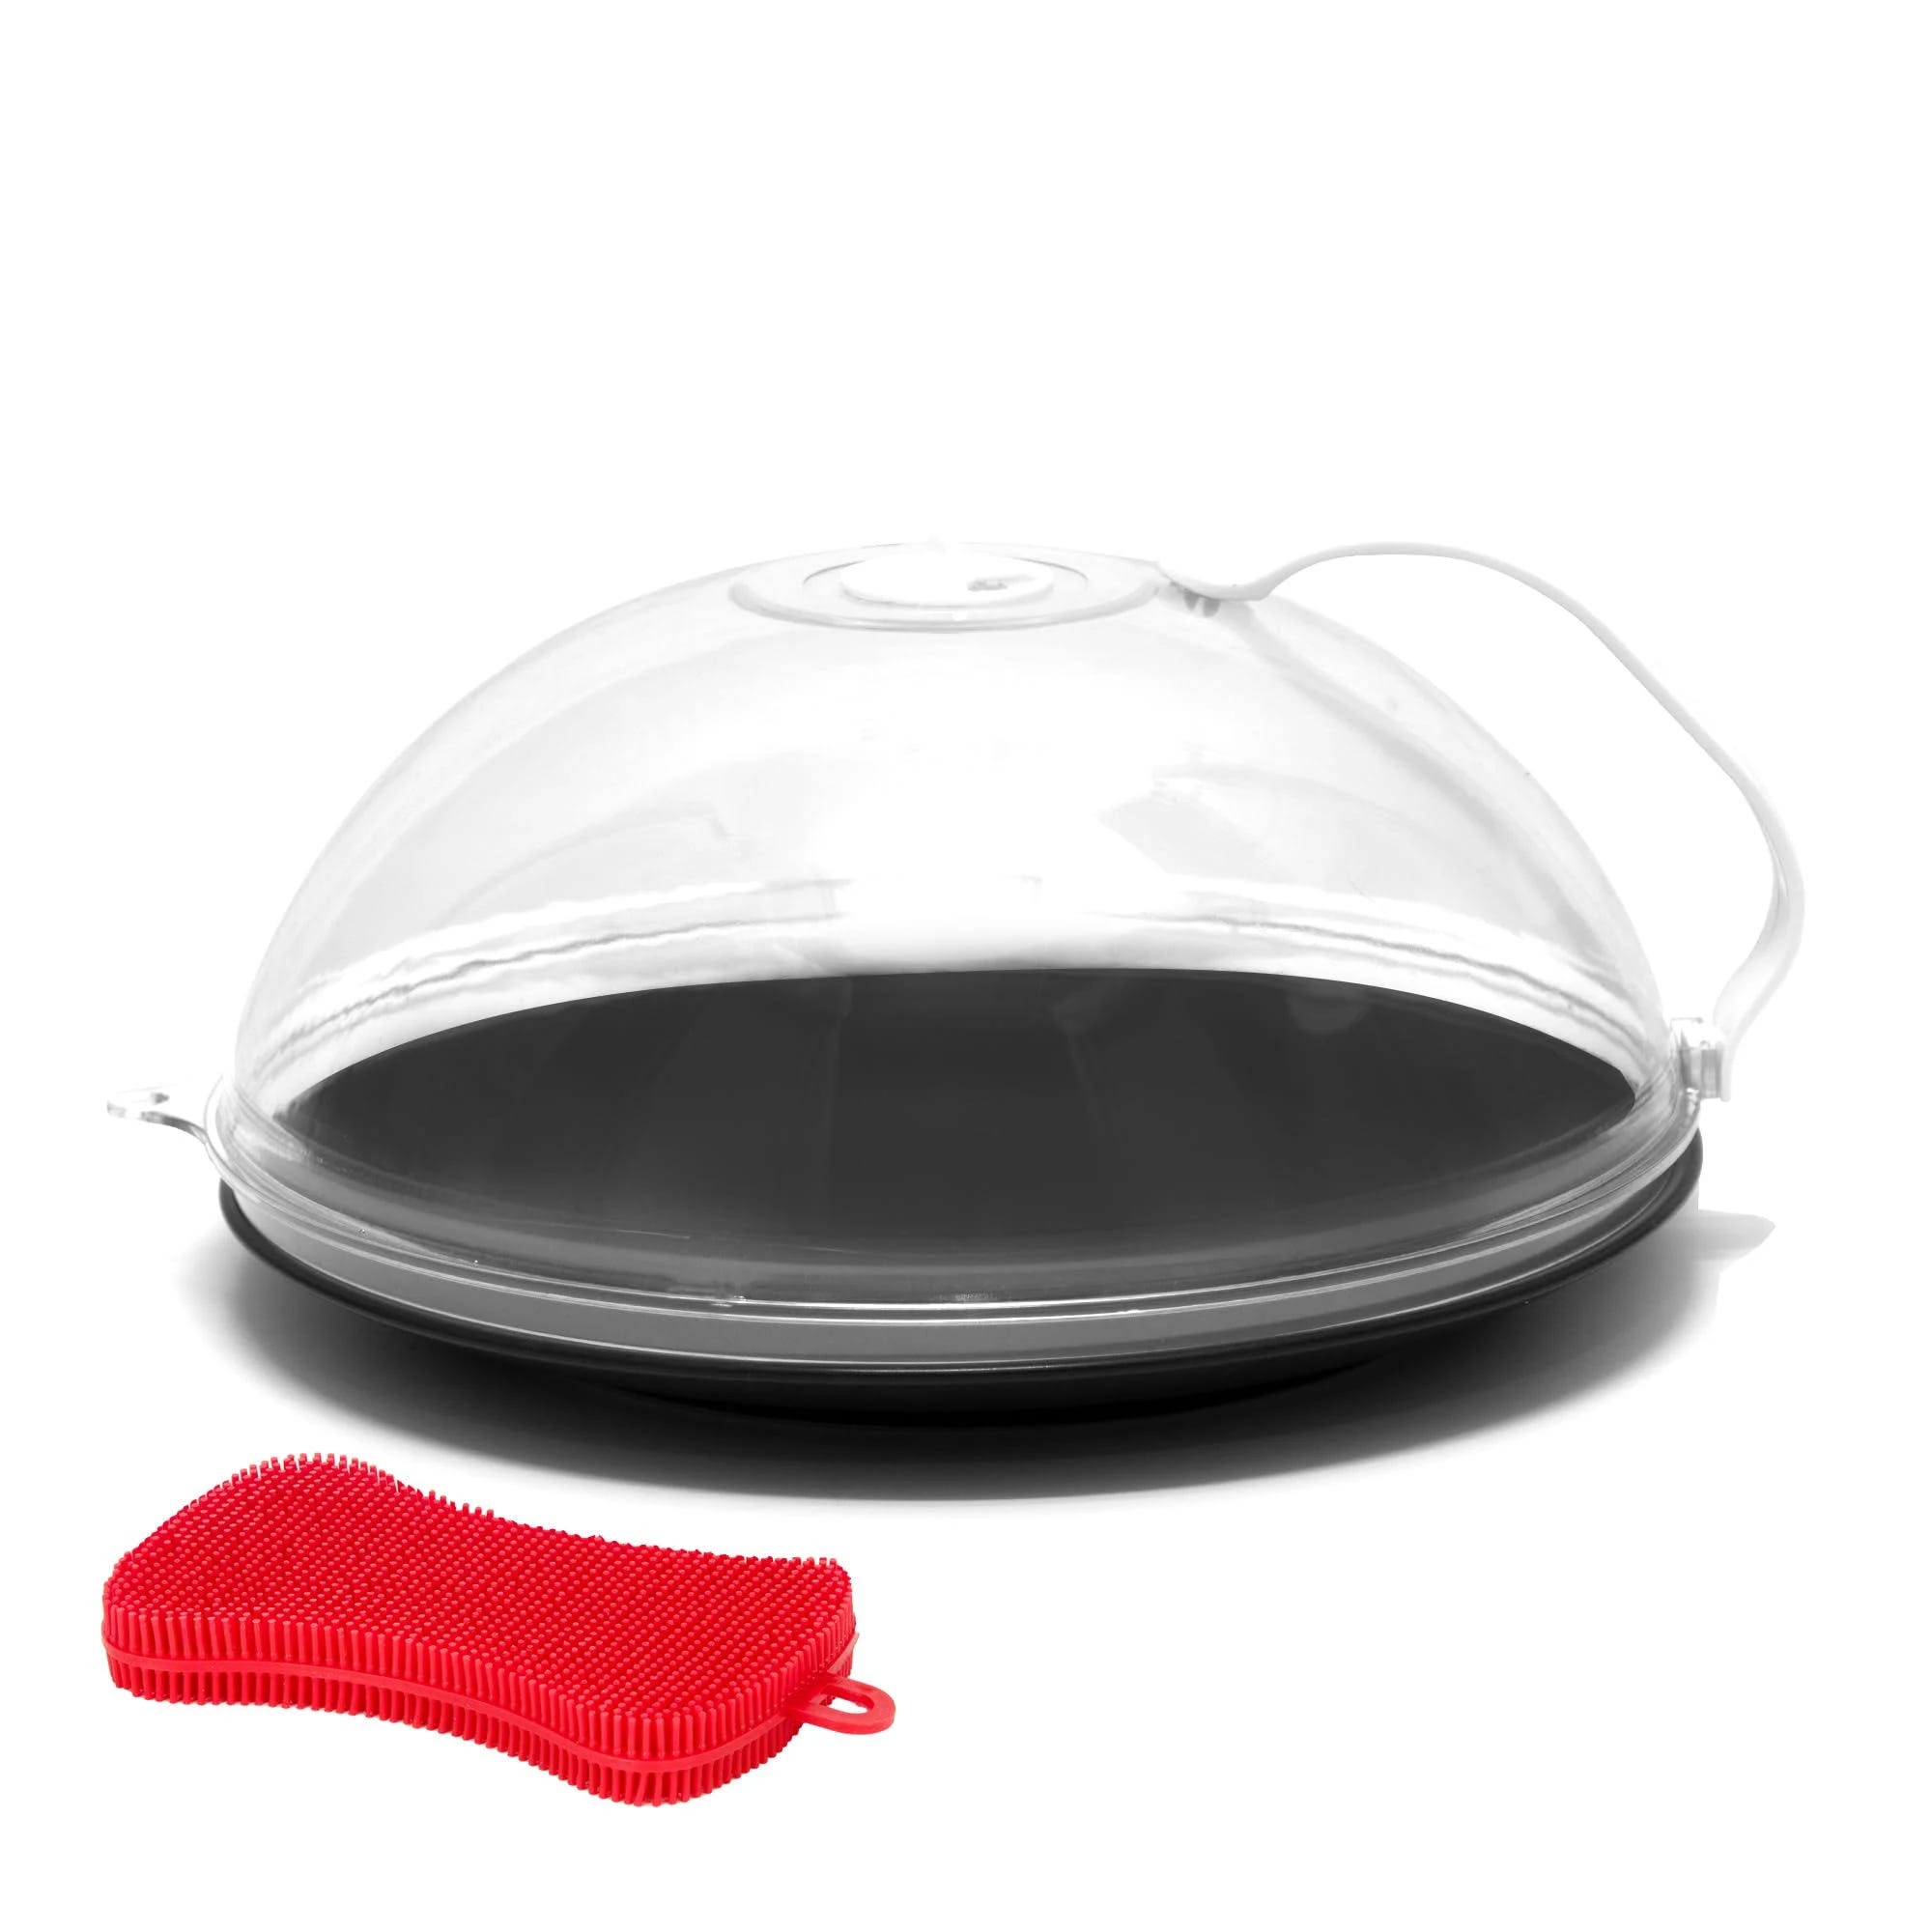 BPA-Free Microwave Splatter Cover for Easy Cleaning | Image